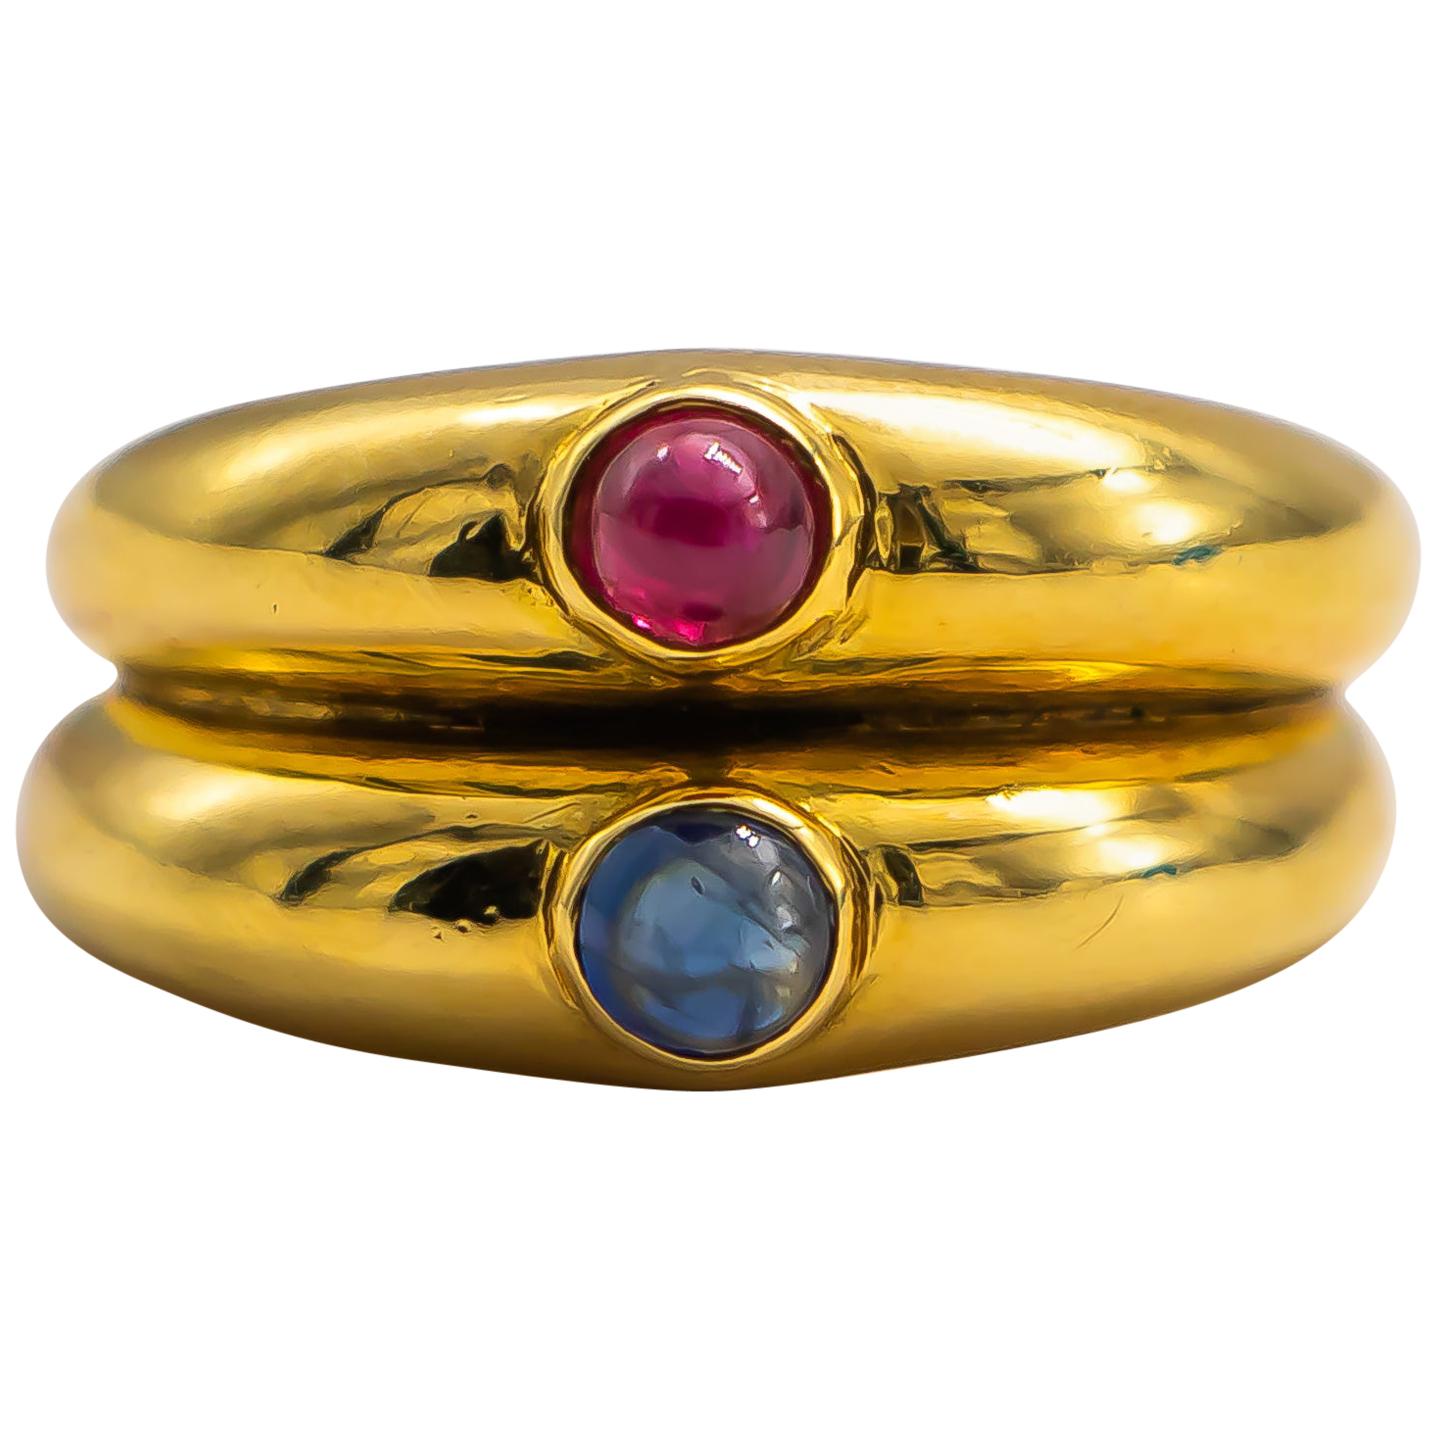 Cabochon 0.2 Carat Ruby and Cabochon 0.2 Carat Sapphire Ring 18K Yellow Gold